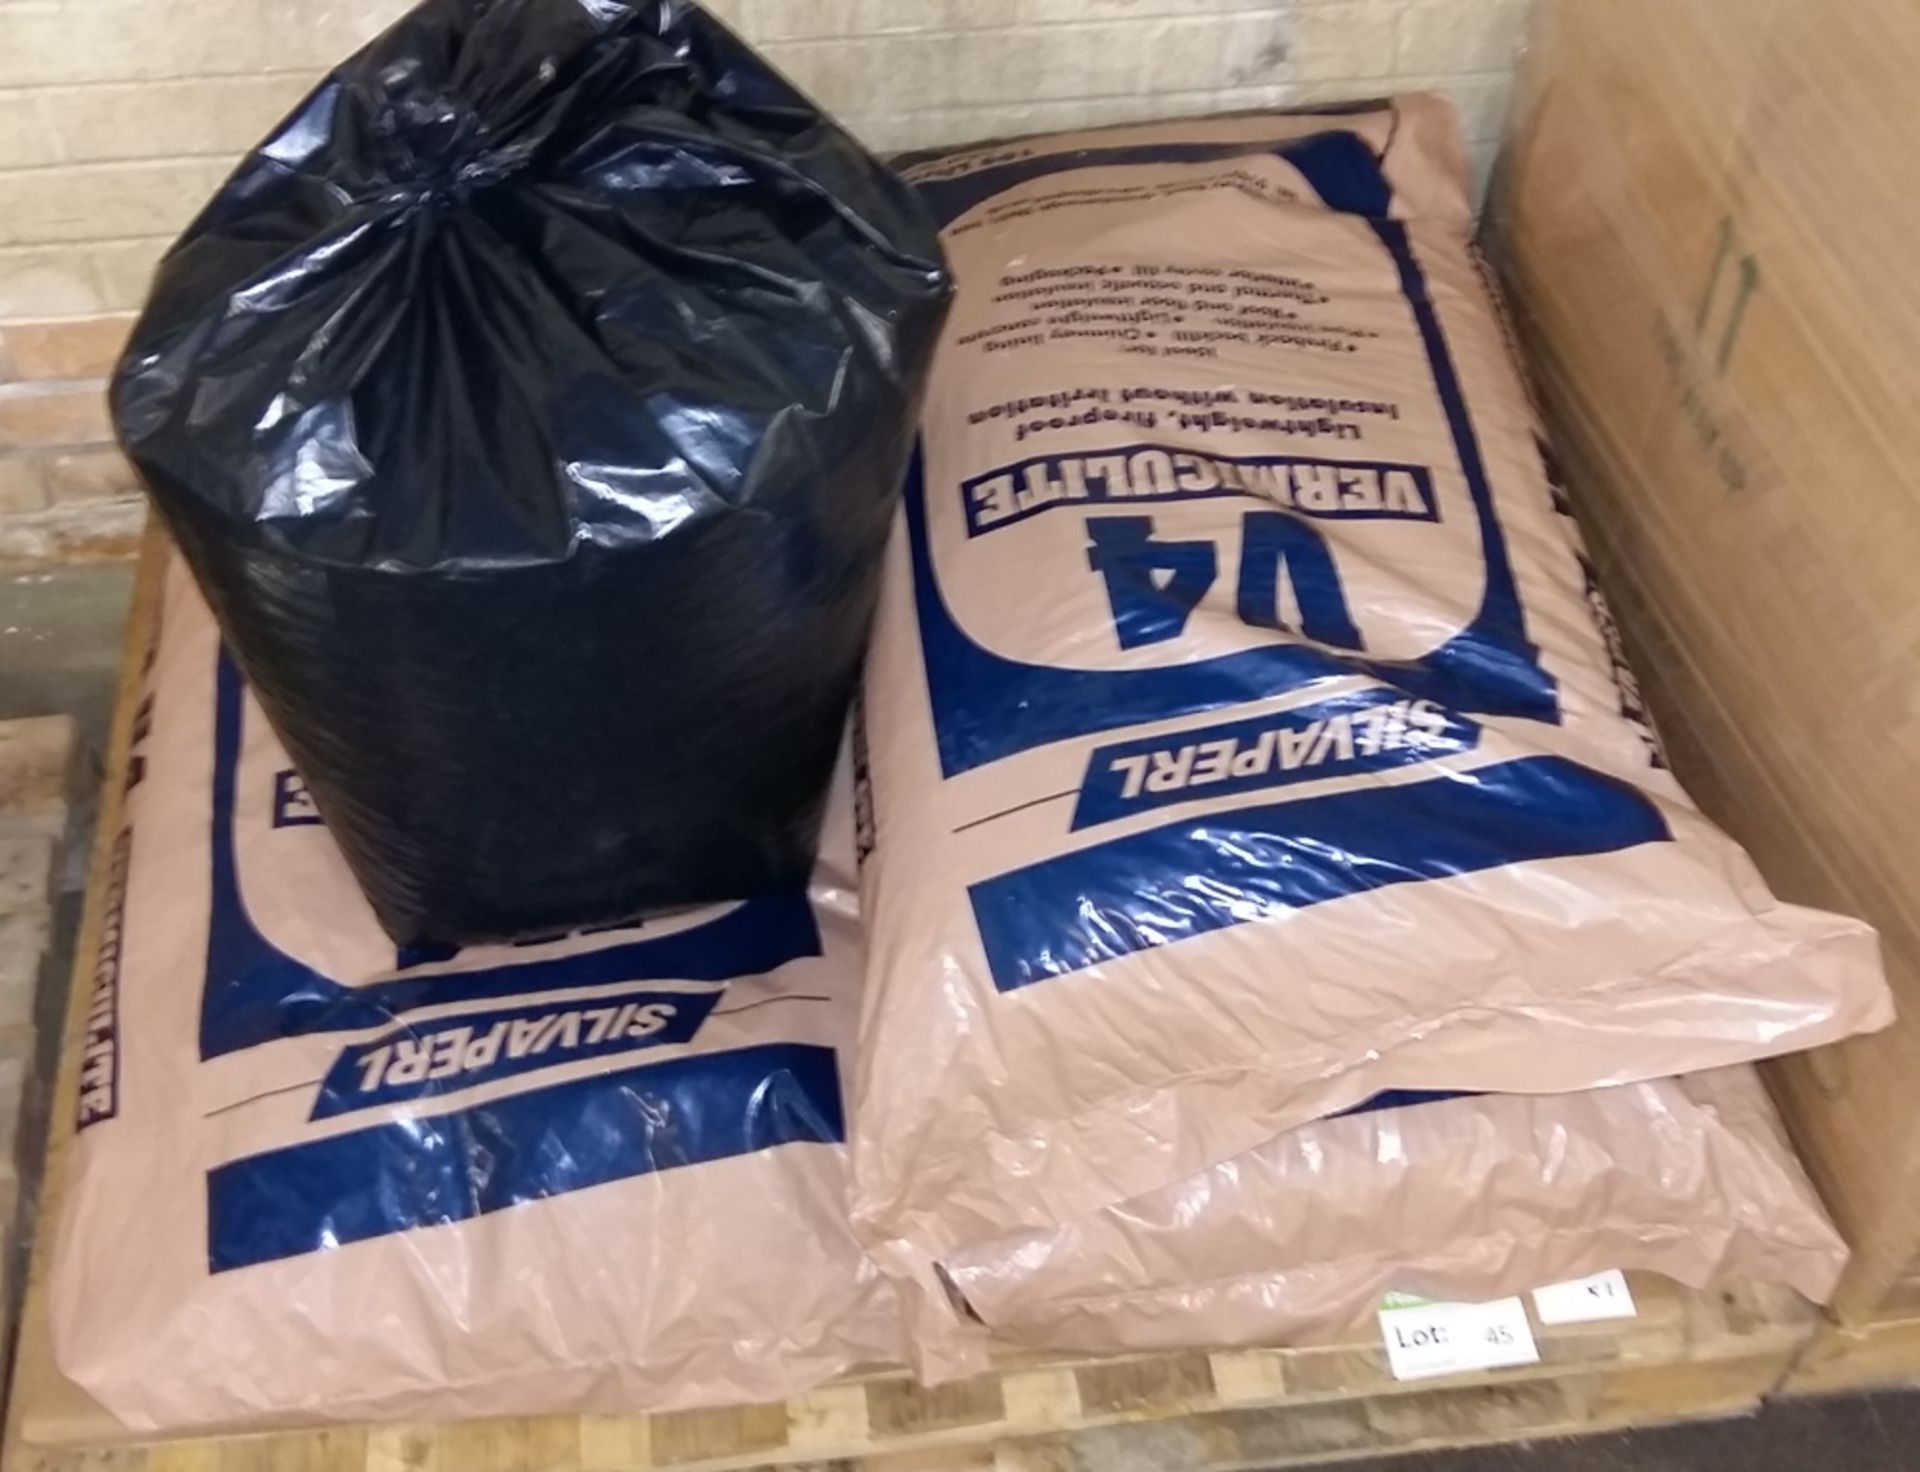 Silvaperl V4 Vermiculite insulation - 3x 100 LTR bags